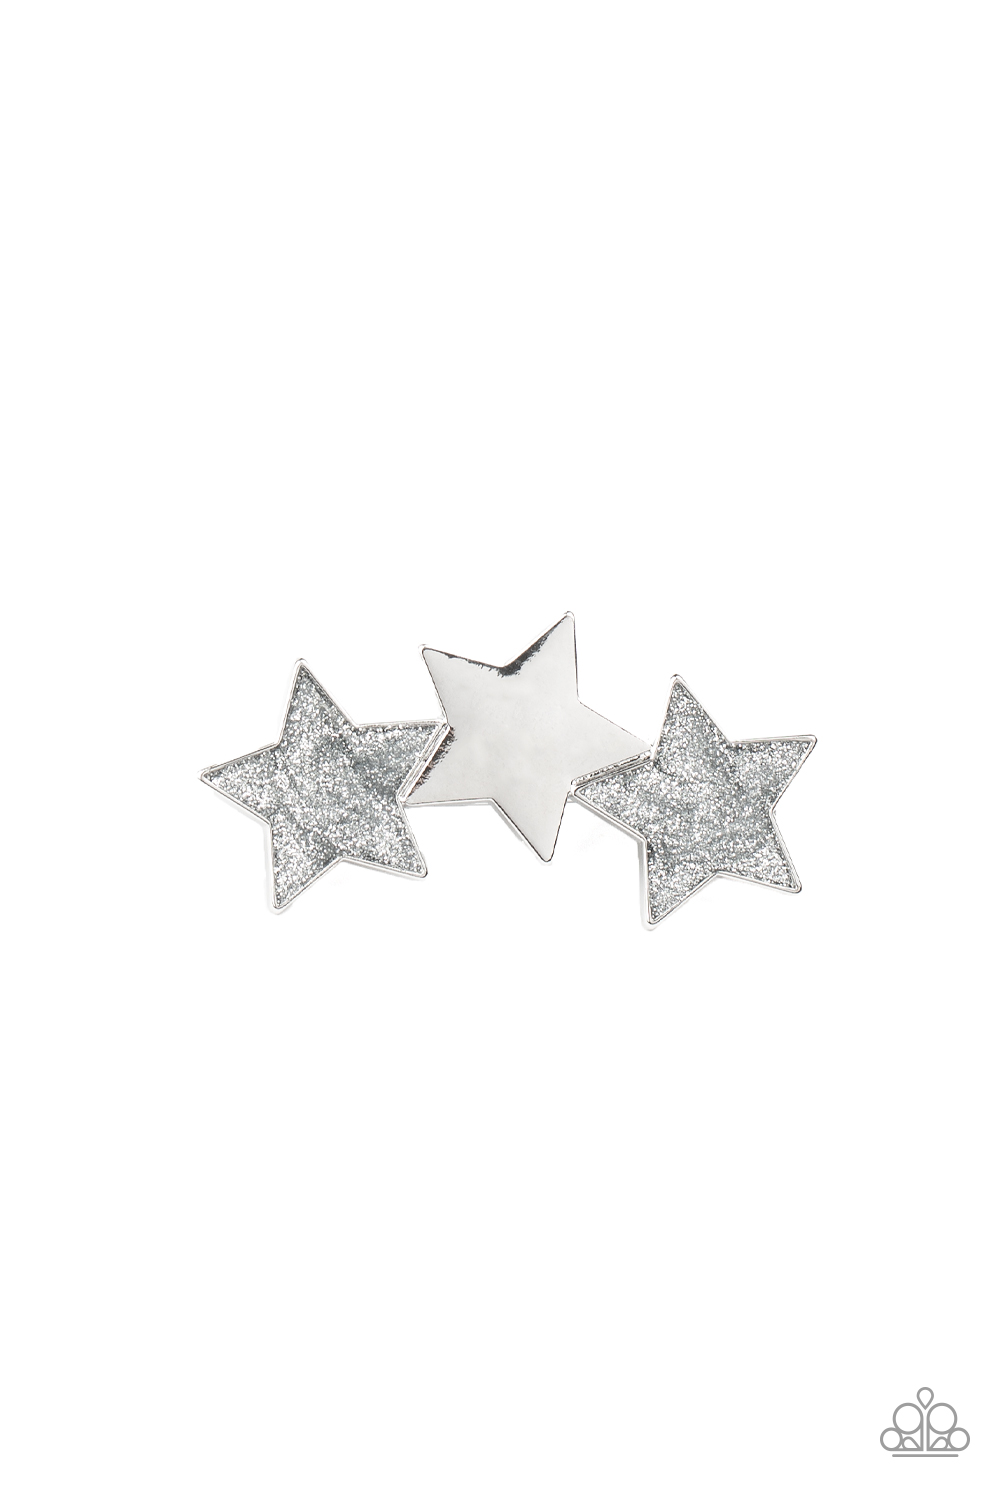 HairClip - Dont Get Me STAR-ted!- Silver